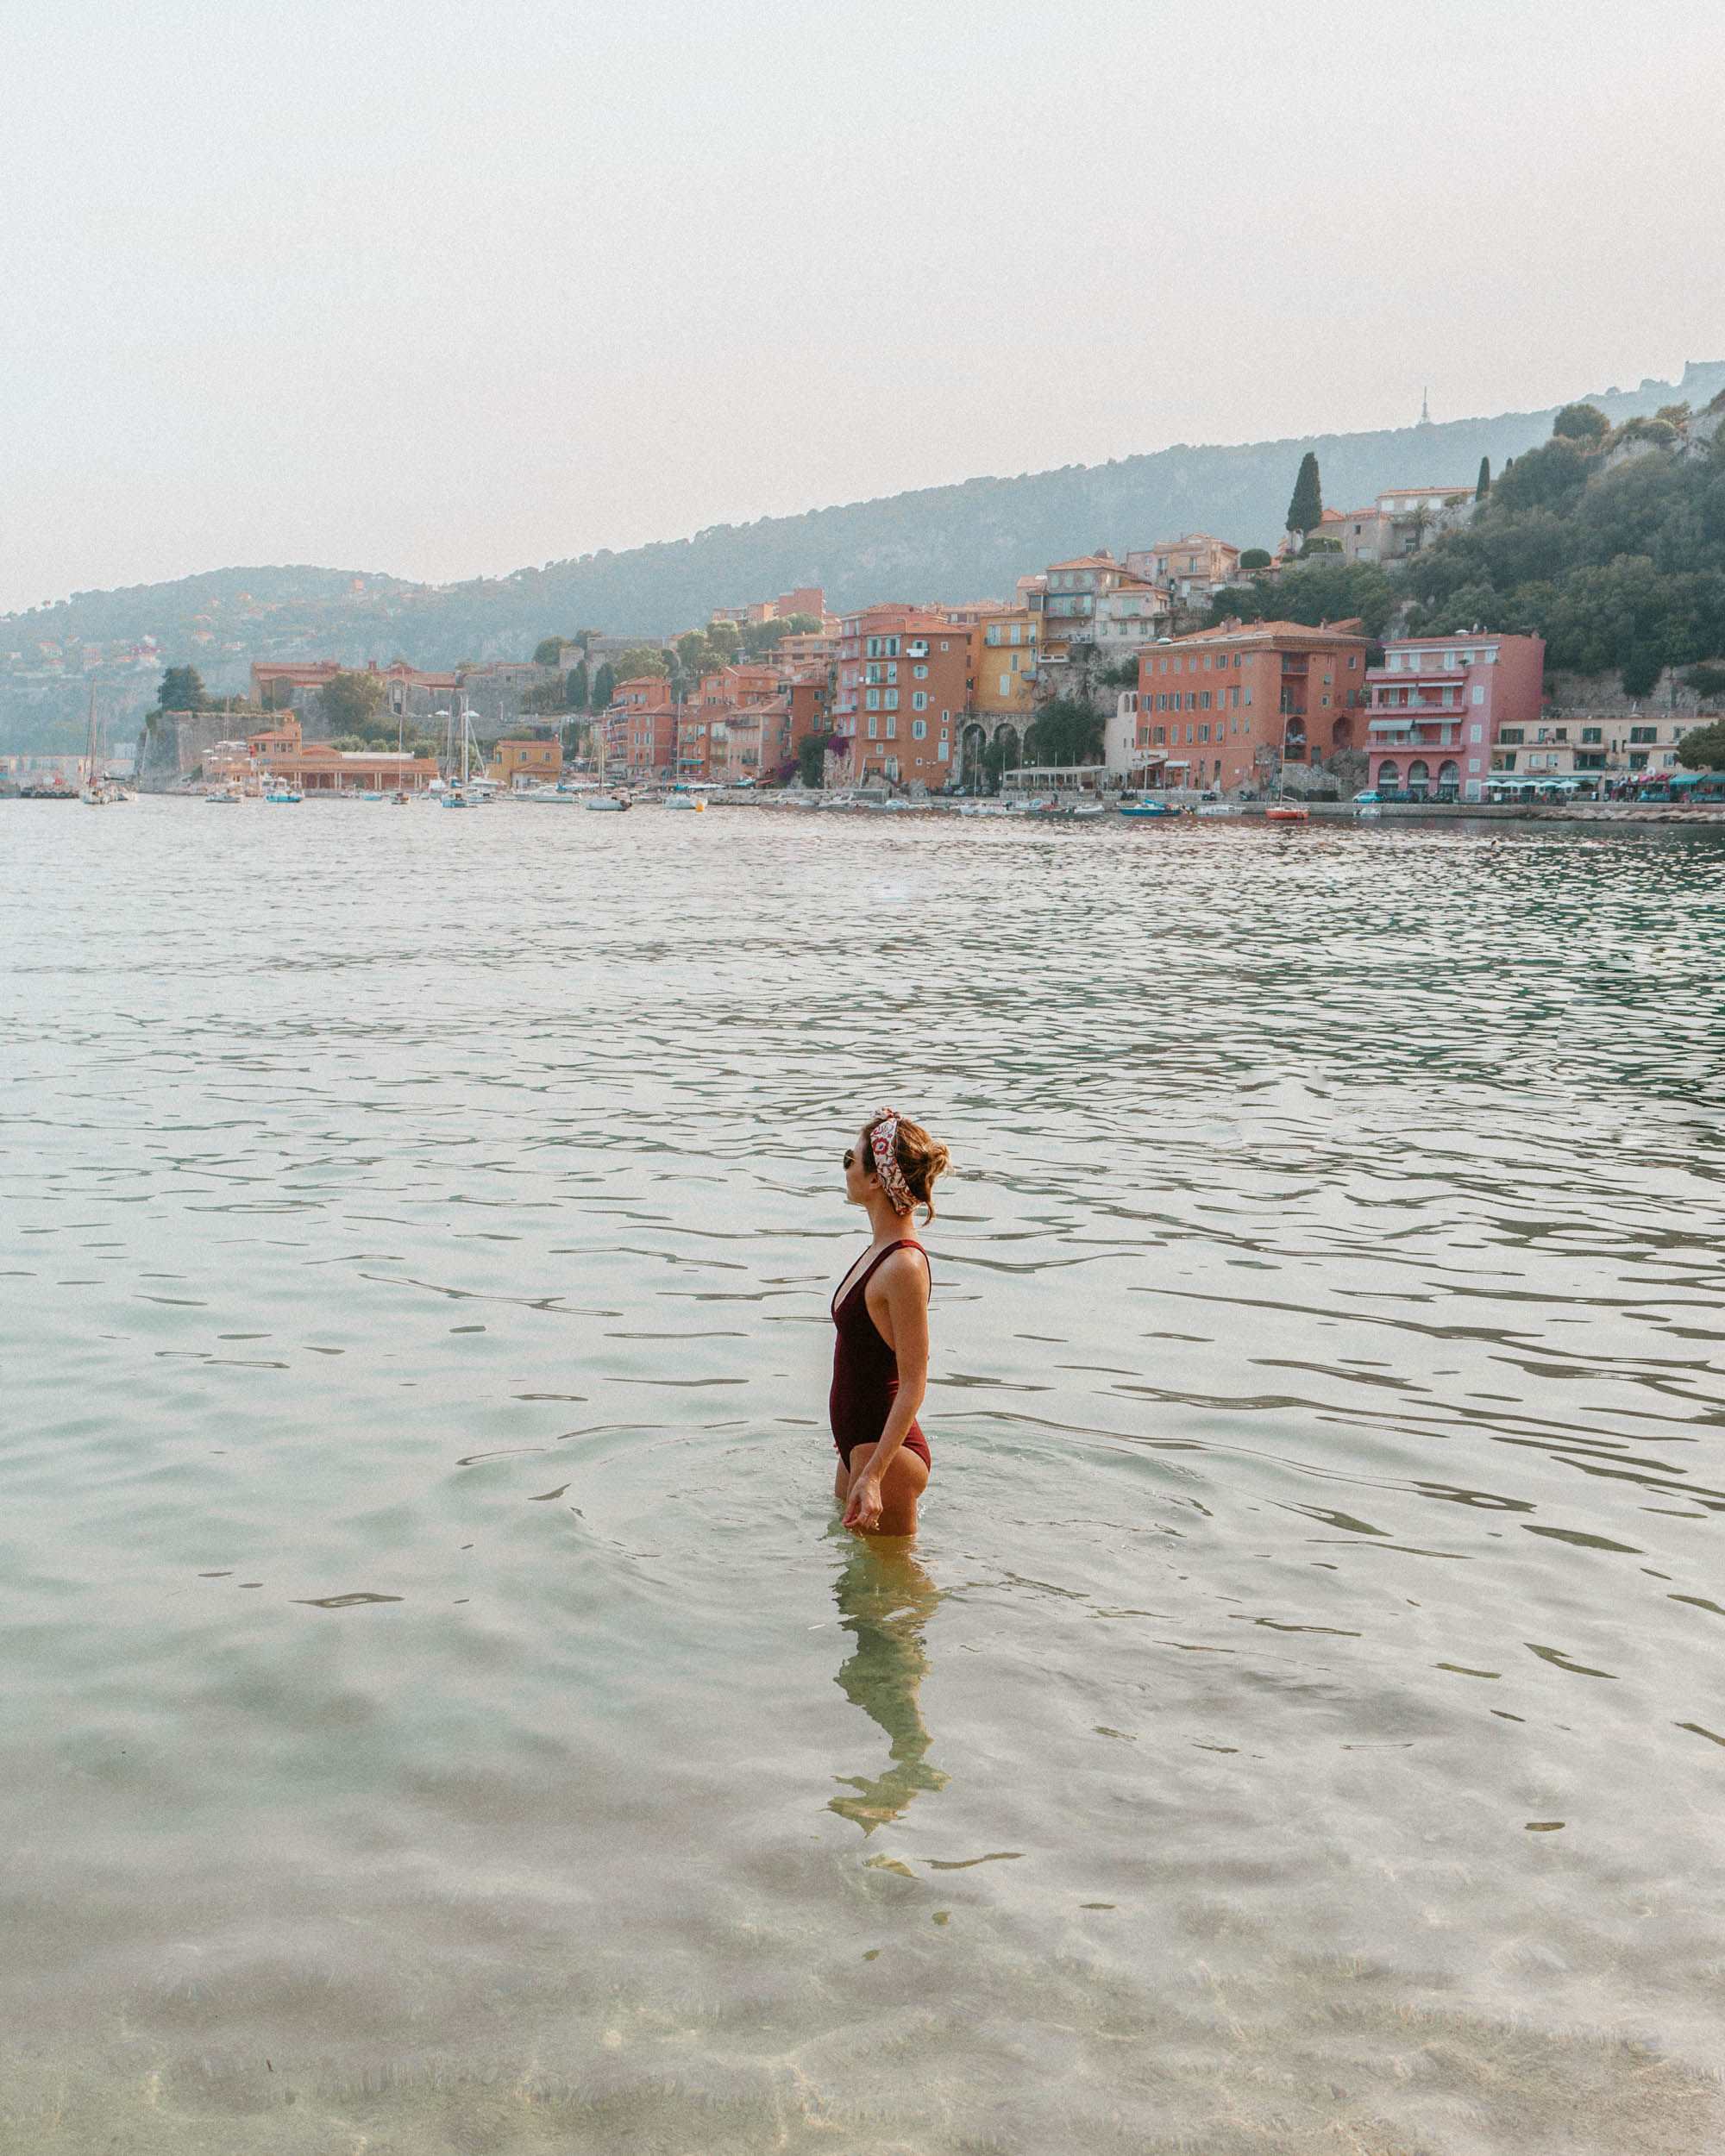 Villefranche-sur-mer beach in the French Riviera via Find Us Lost